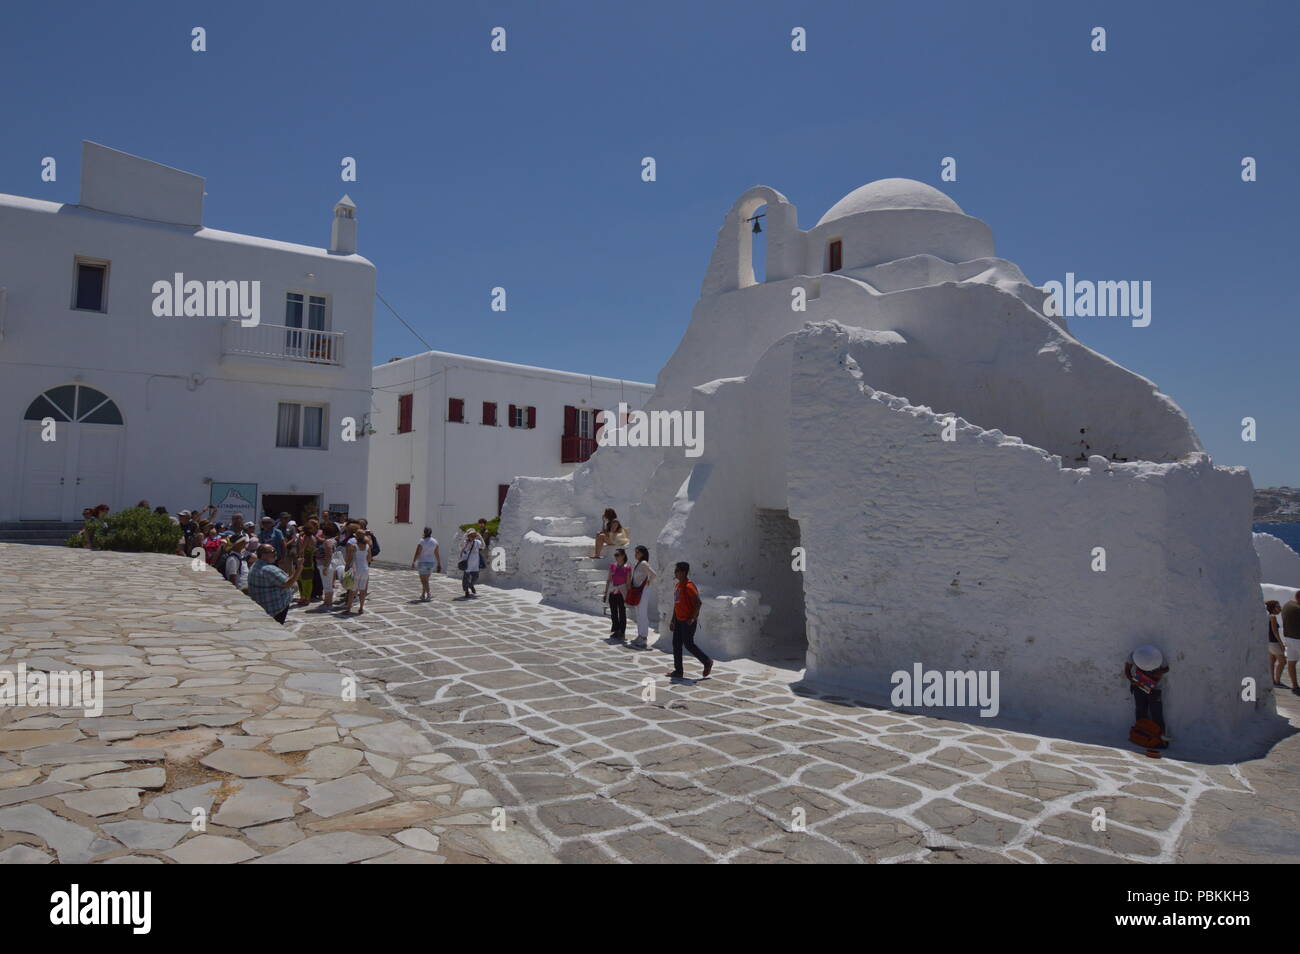 Main Facade Of The Church Of Paraportiani In Chora Island Of Mikonos .Arte History Architecture.3 Of July 2018. Chora, Island Of Mikonos, Greece. Stock Photo